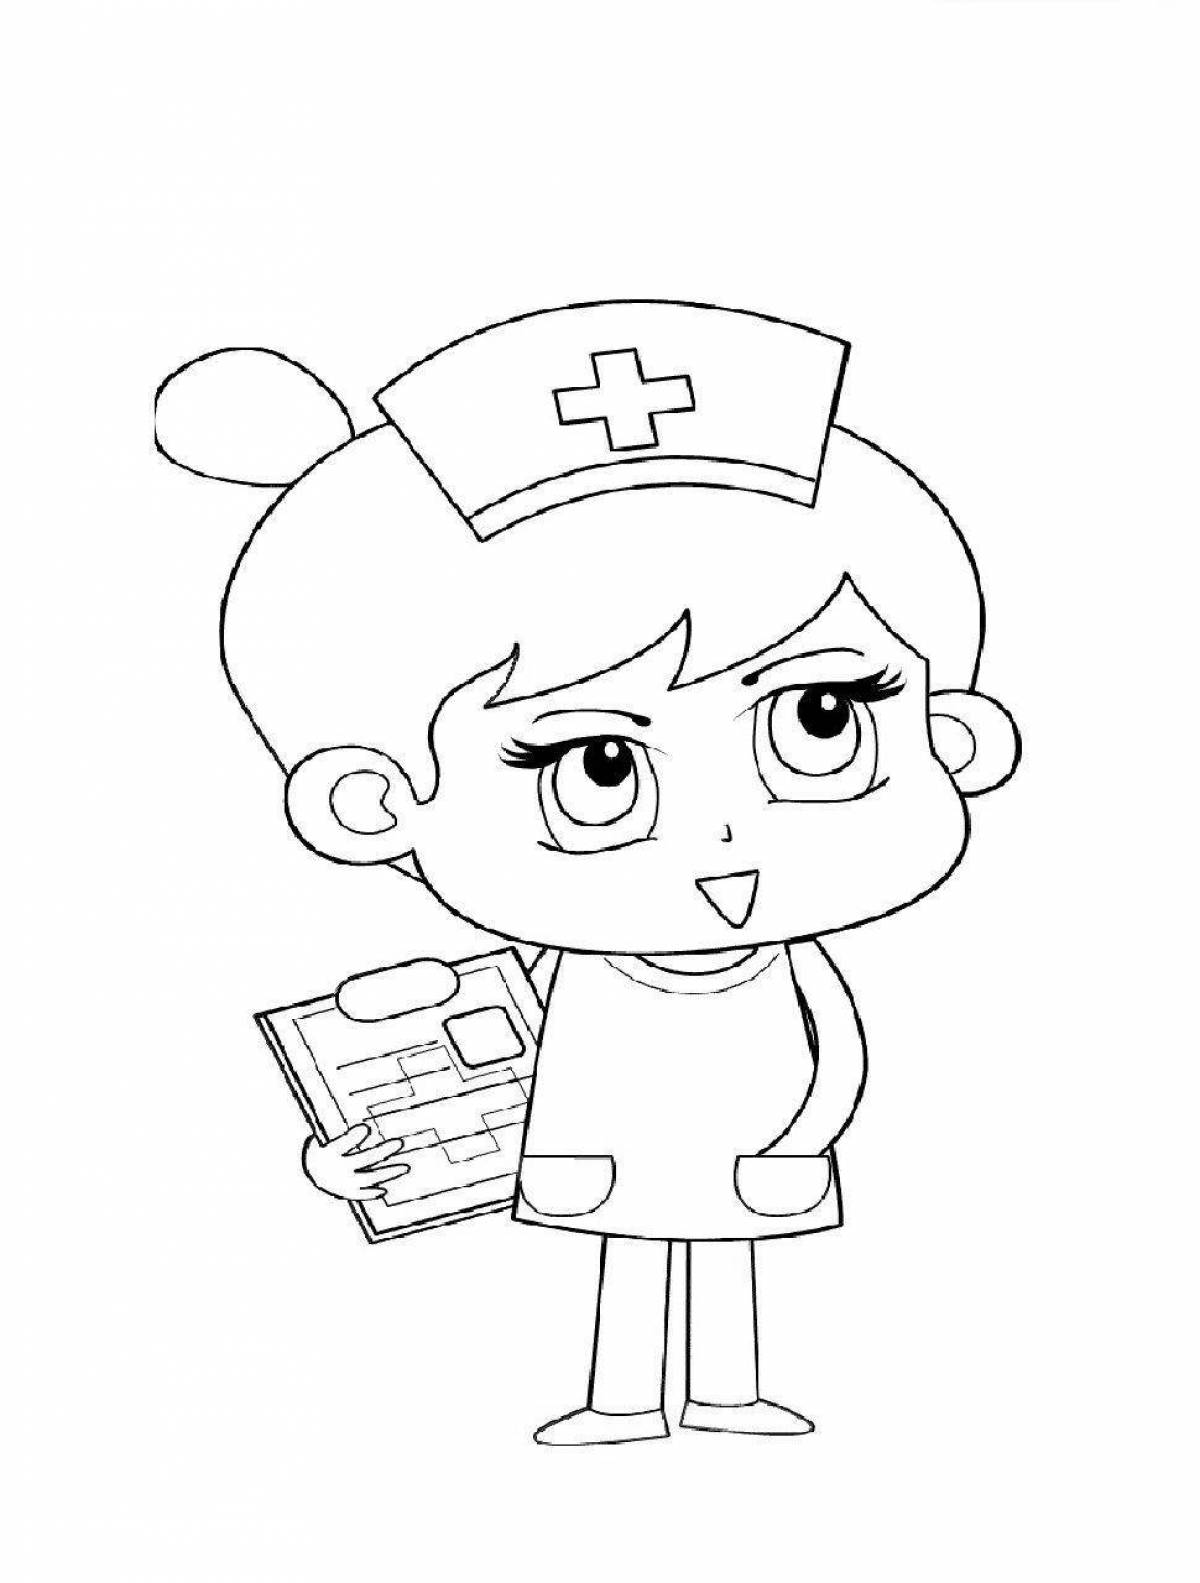 Charming nurse coloring book for kids